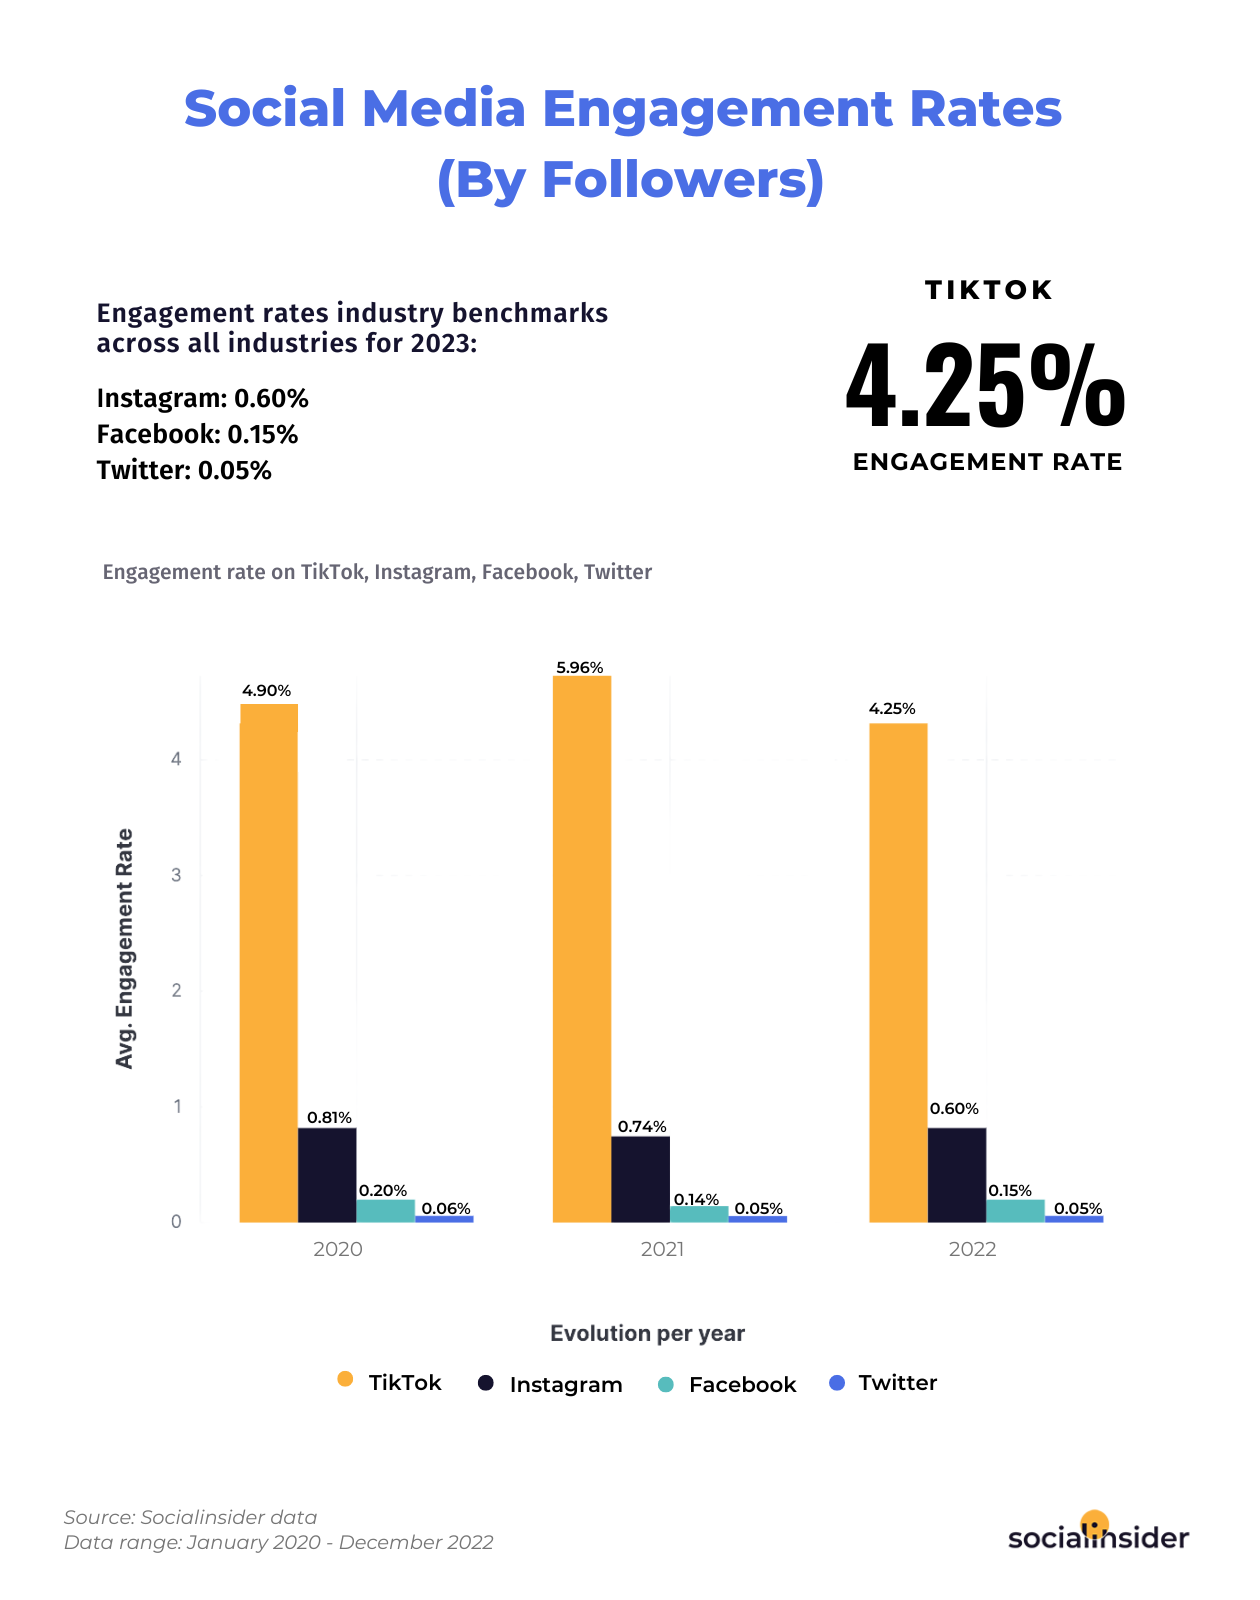 Here you can see a chart showing social media engagement benchmarks for 2023.